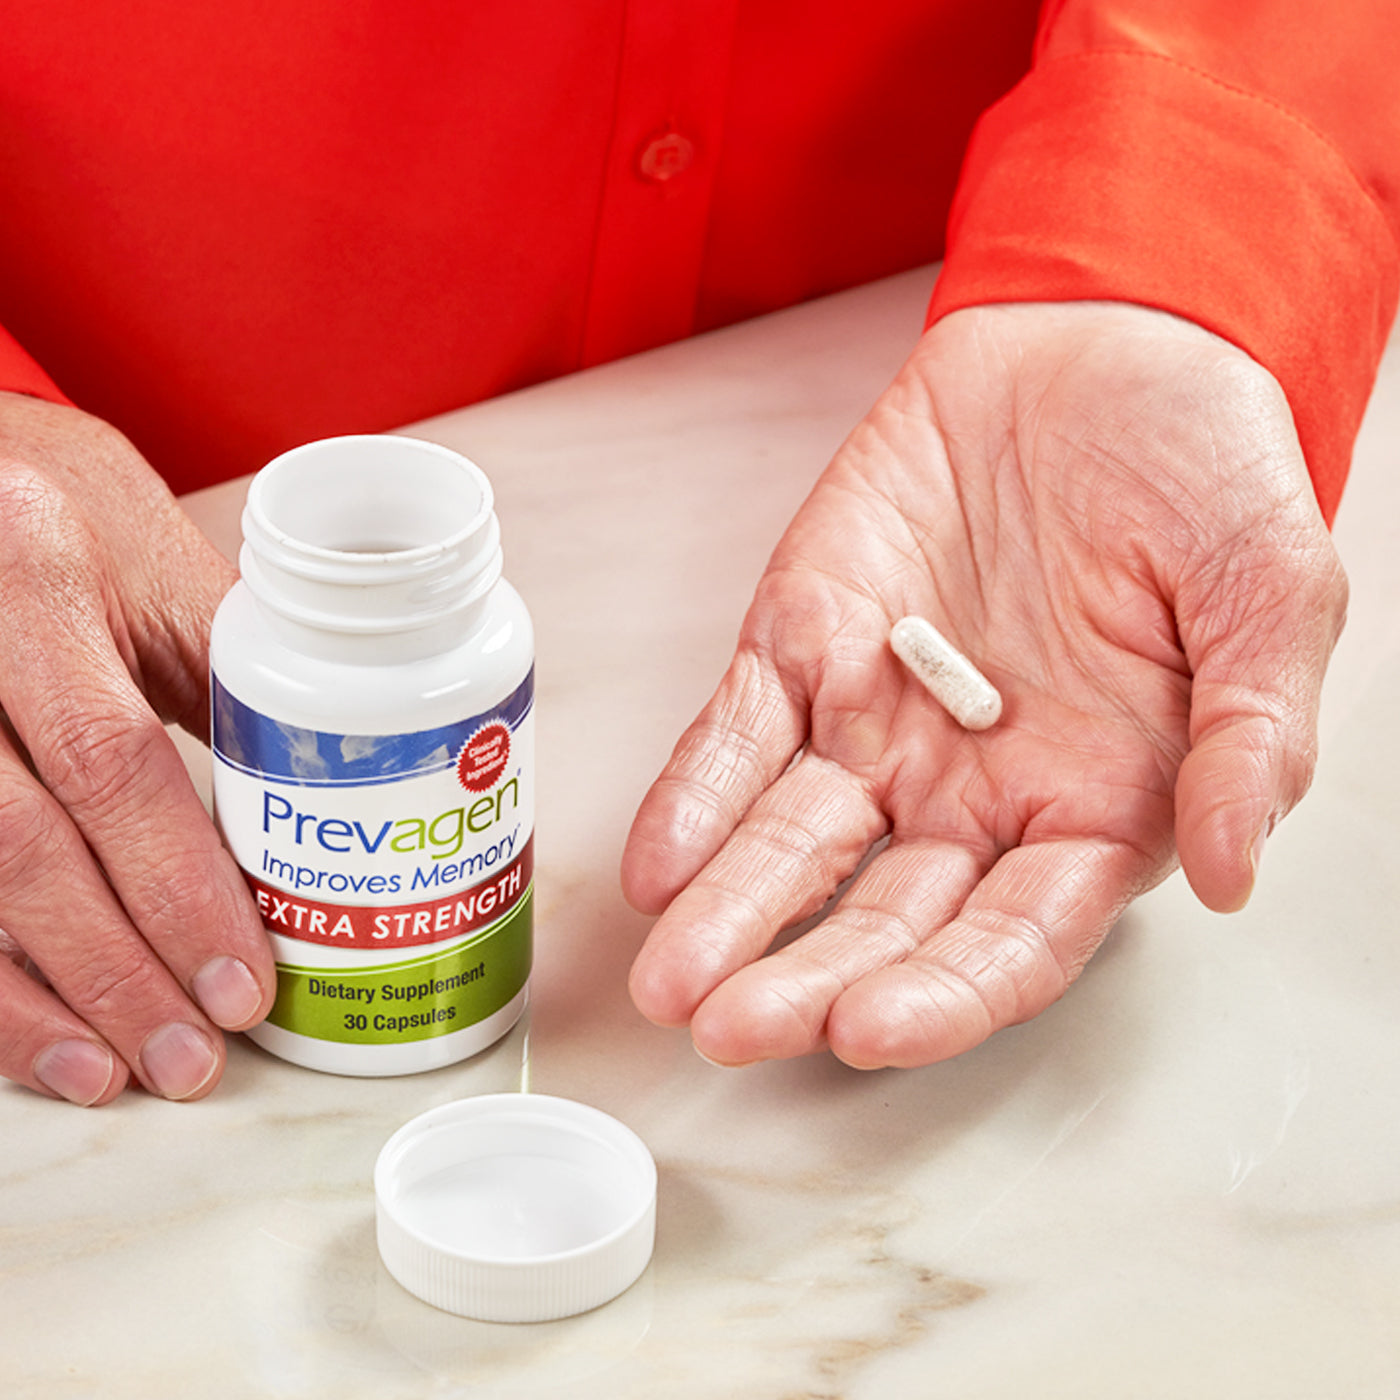 Capsule in hand from Prevagen extra strength 30 day supply bottle